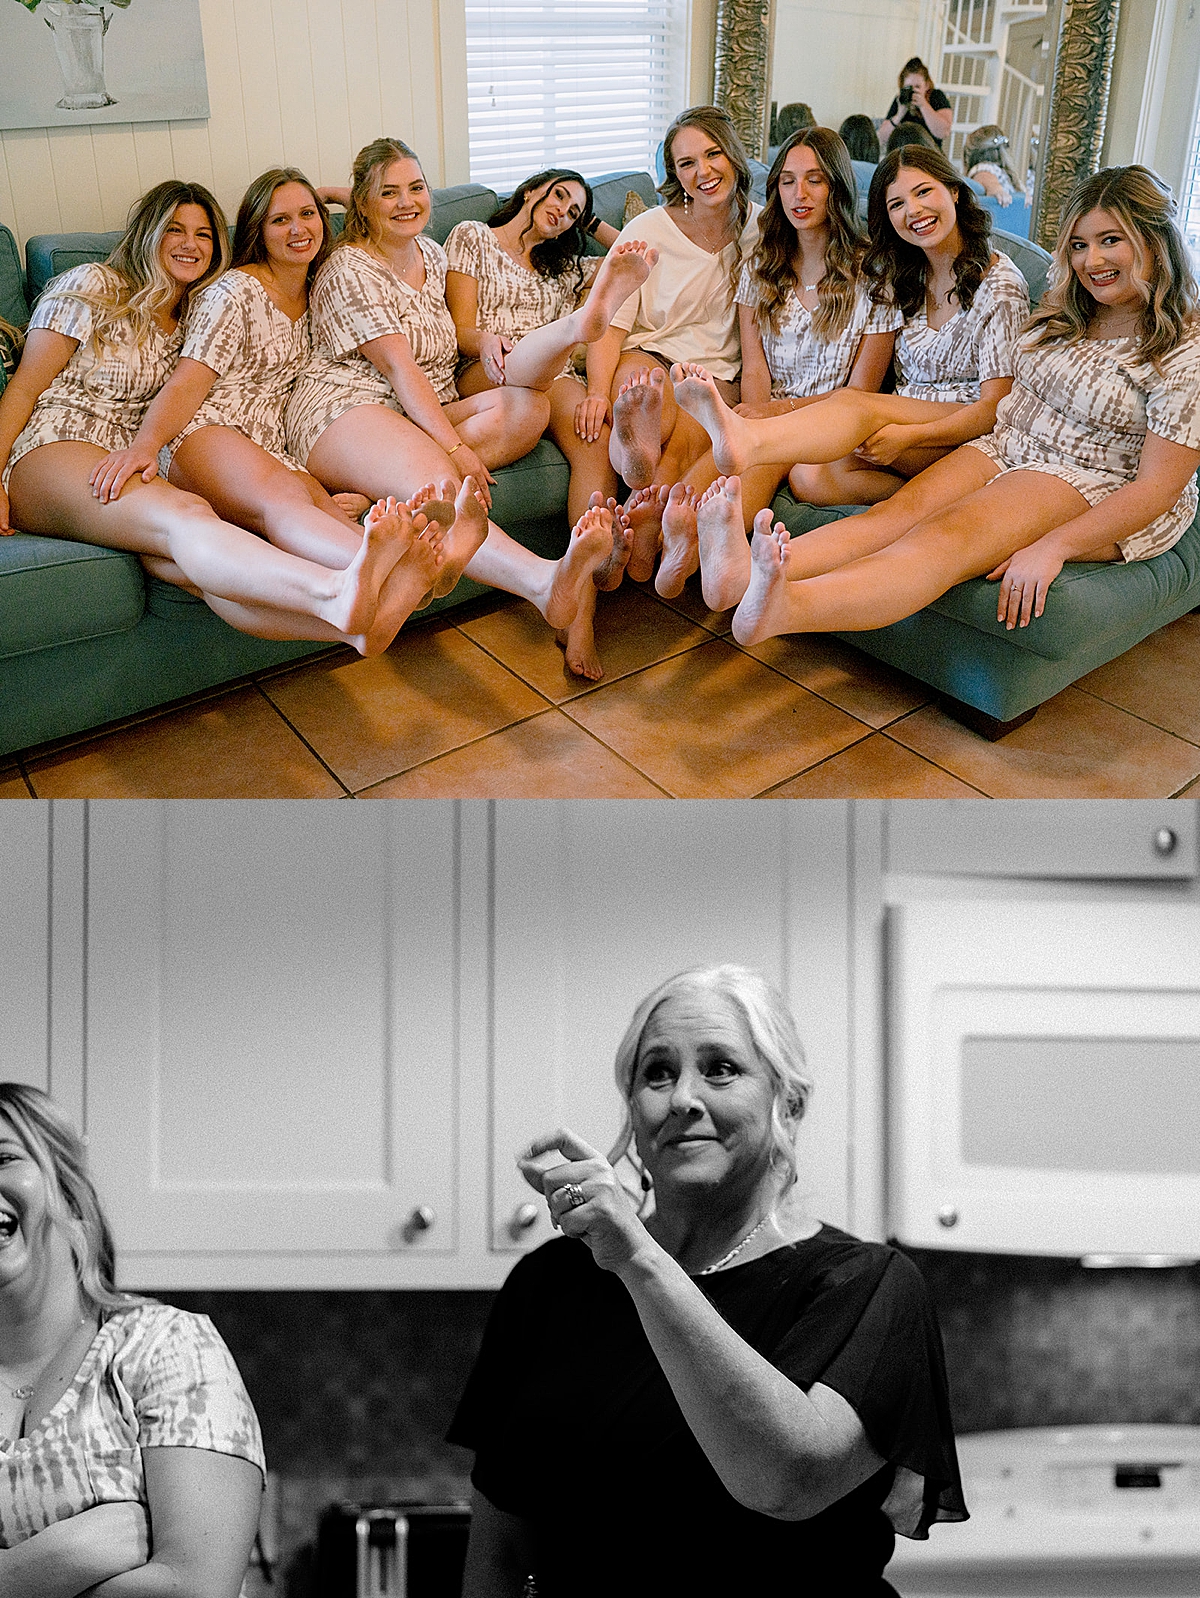 bridesmaids wearing matching pajamas while getting ready by Emily burns photo